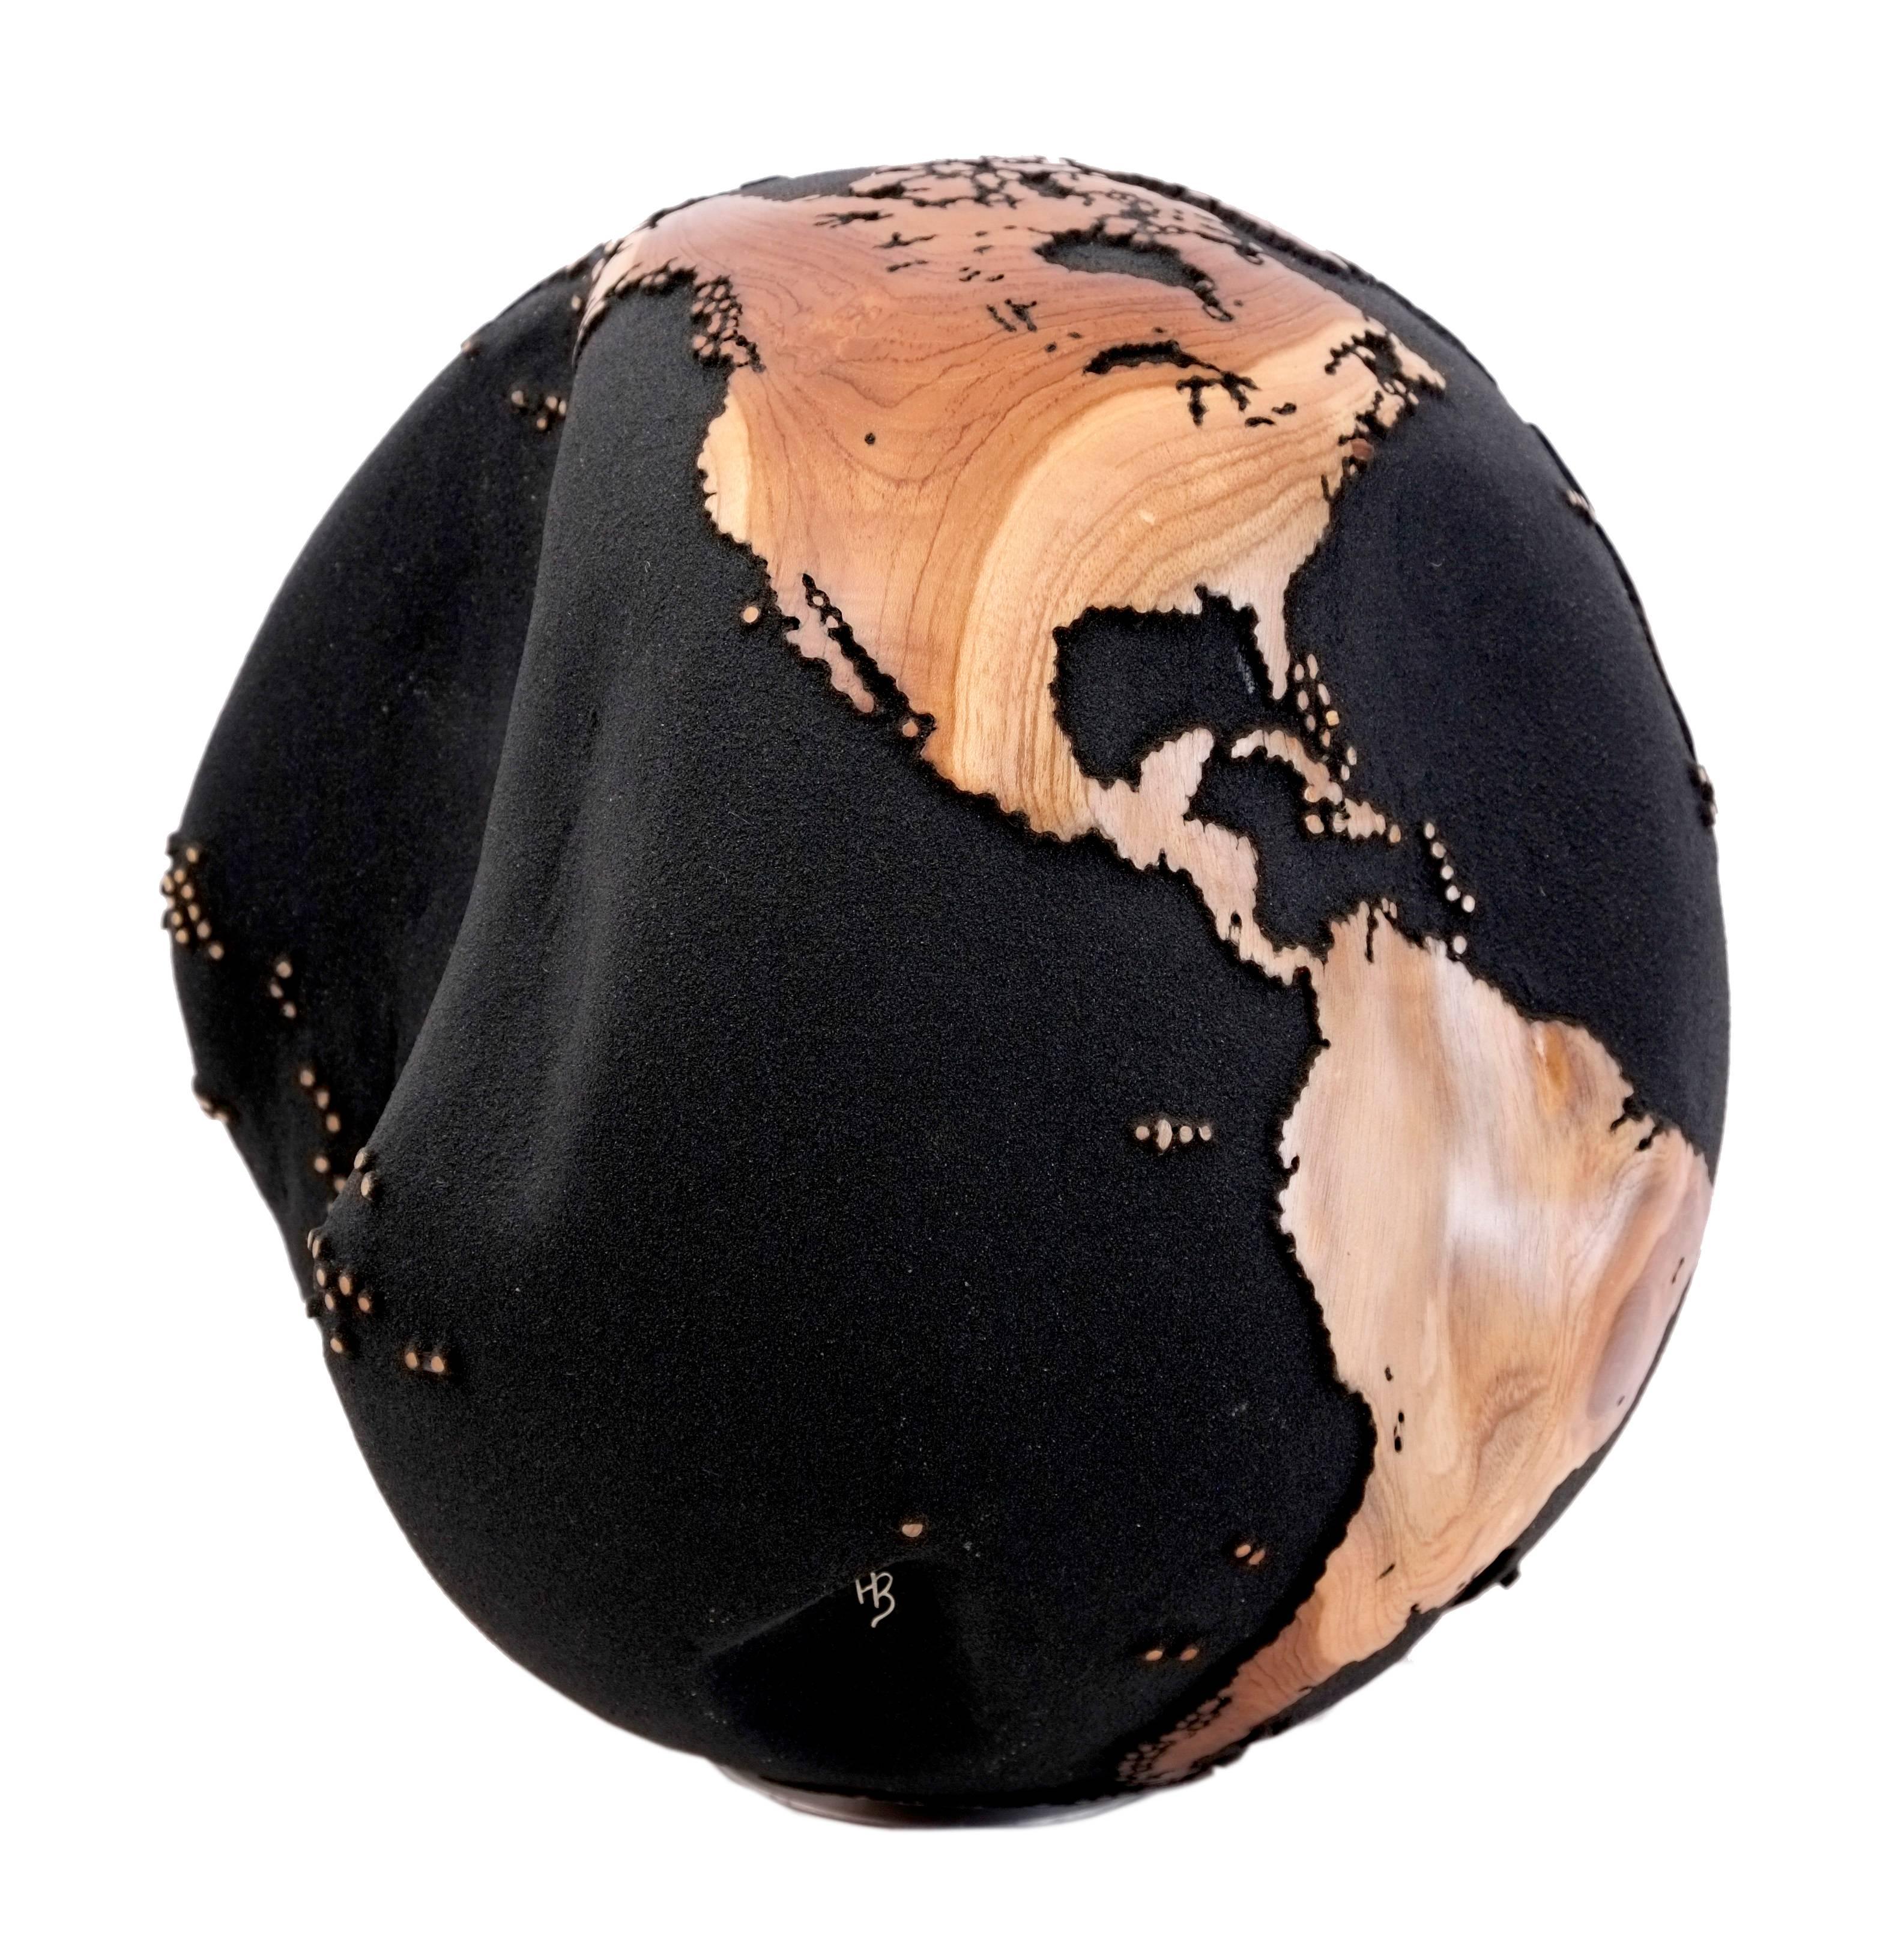 There's no exquisite beauty without some strangeness in the proportion.

Stunning hand carved wooden globe made of teak root and volcanic sand, this piece has an appealing natural shape.

Dimension: 13.78 In / 35 cm
Materials: Reclaimed teak root,